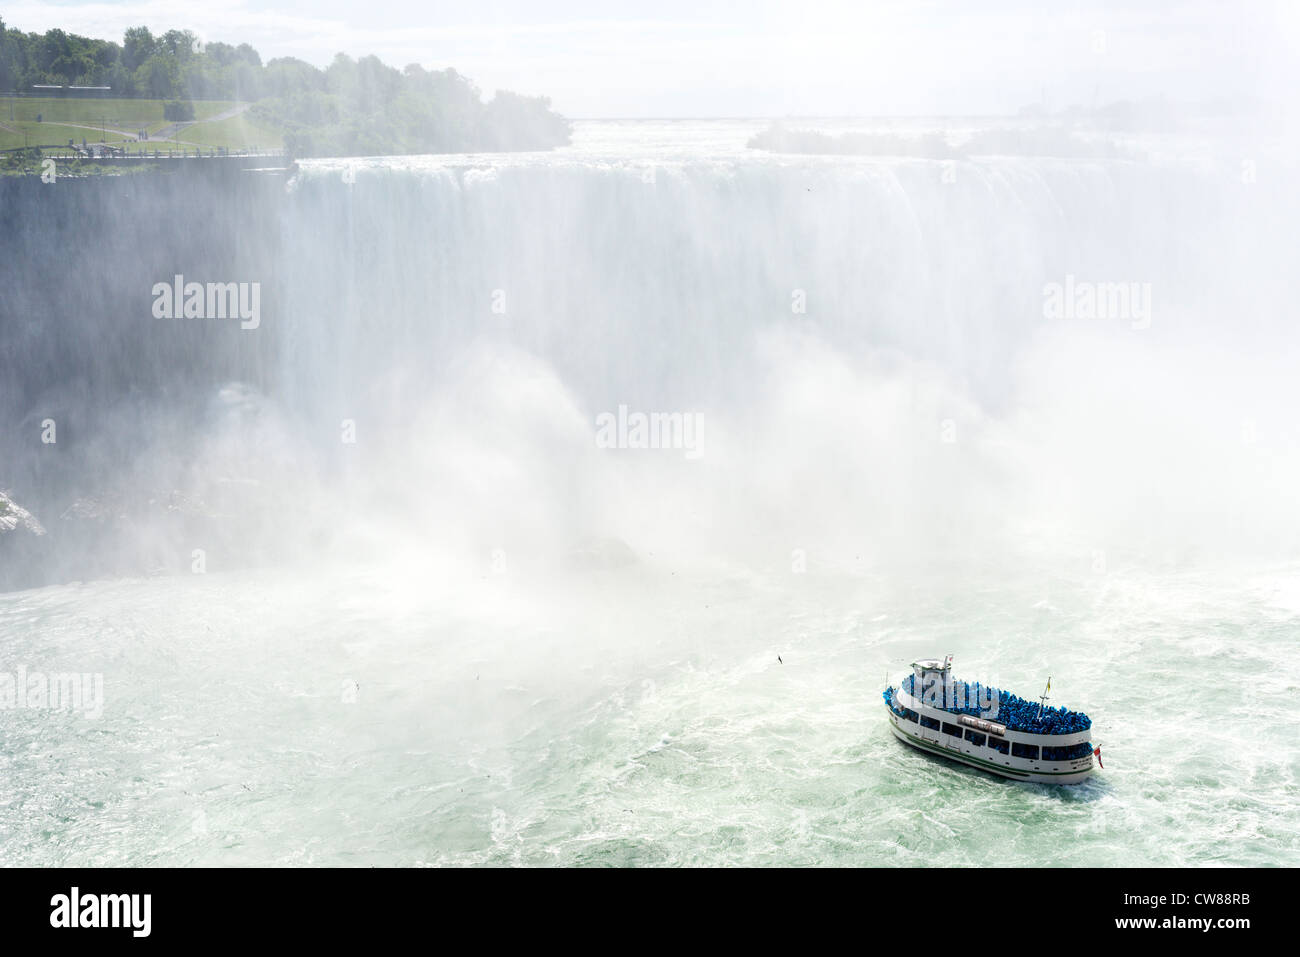 Maid of the Mist tour boat in front of the Horseshoe Falls viewed from the Canadian side, Niagara Falls , Ontario, Canada Stock Photo